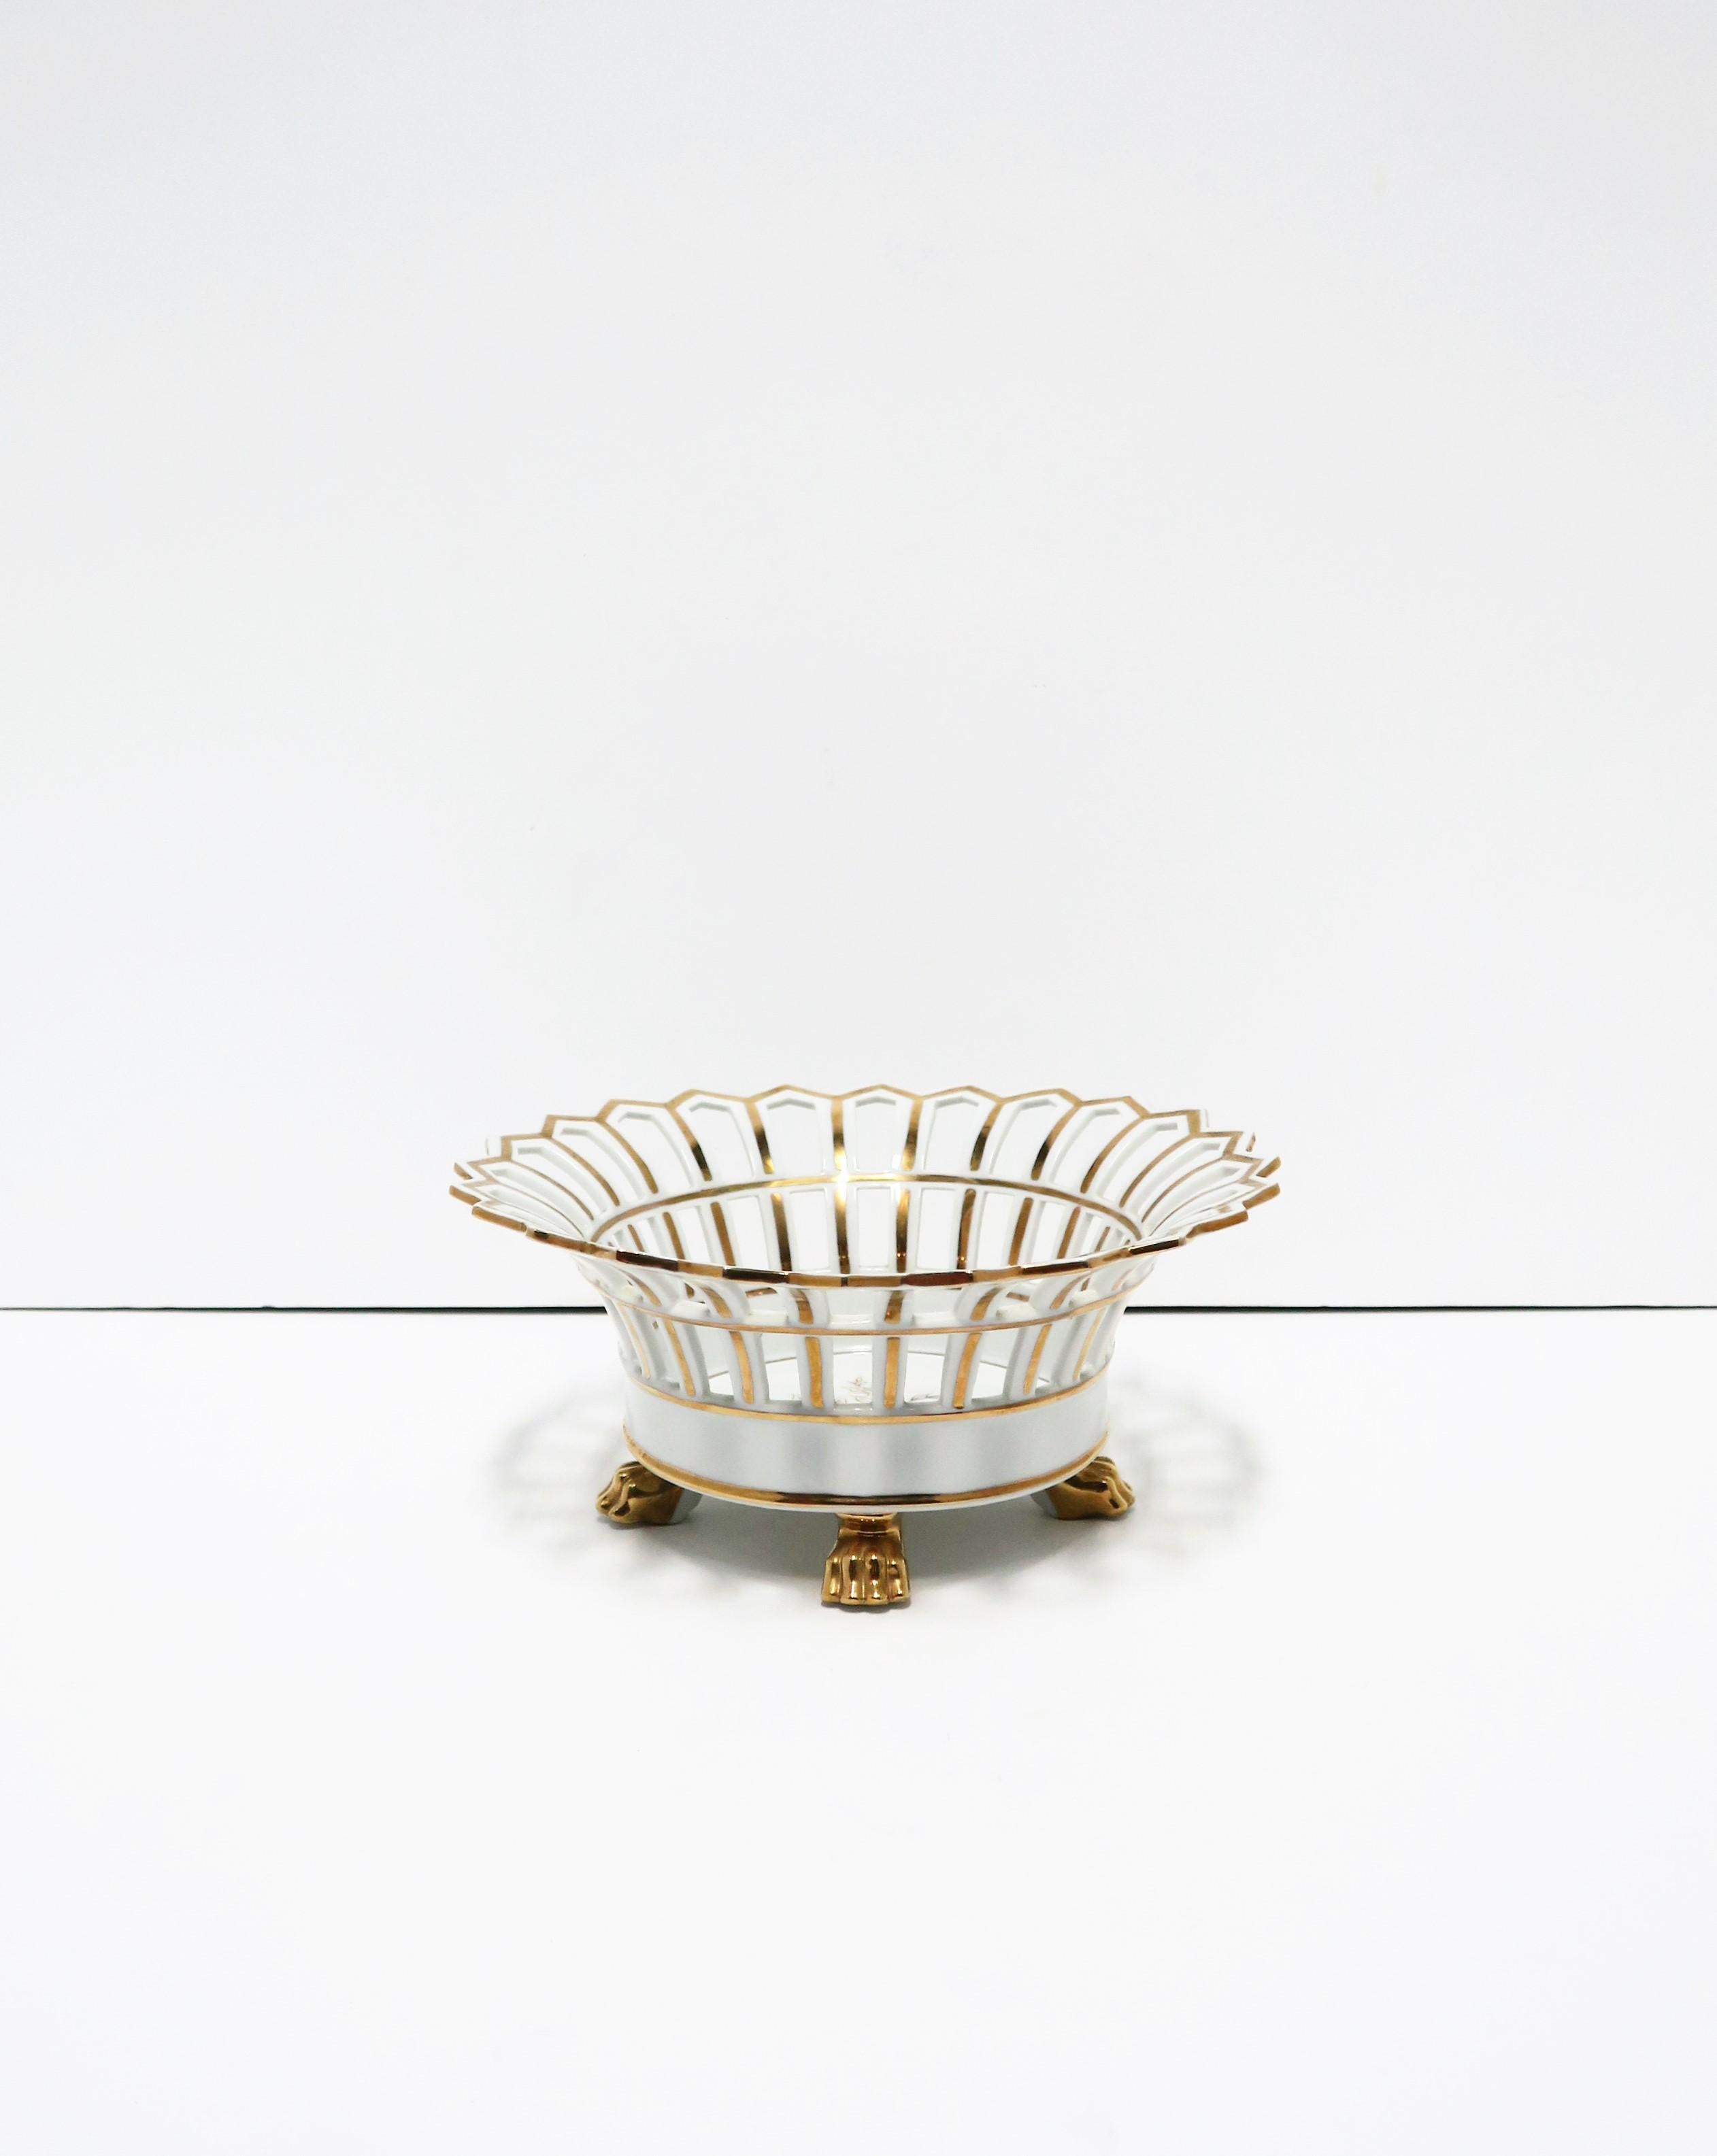 A beautiful French round white and gold pierced Paris Porcelain compote basket centerpiece bowl with lion paw feet in the Empire style, circa 20th century, France. Dimensions: 4.38